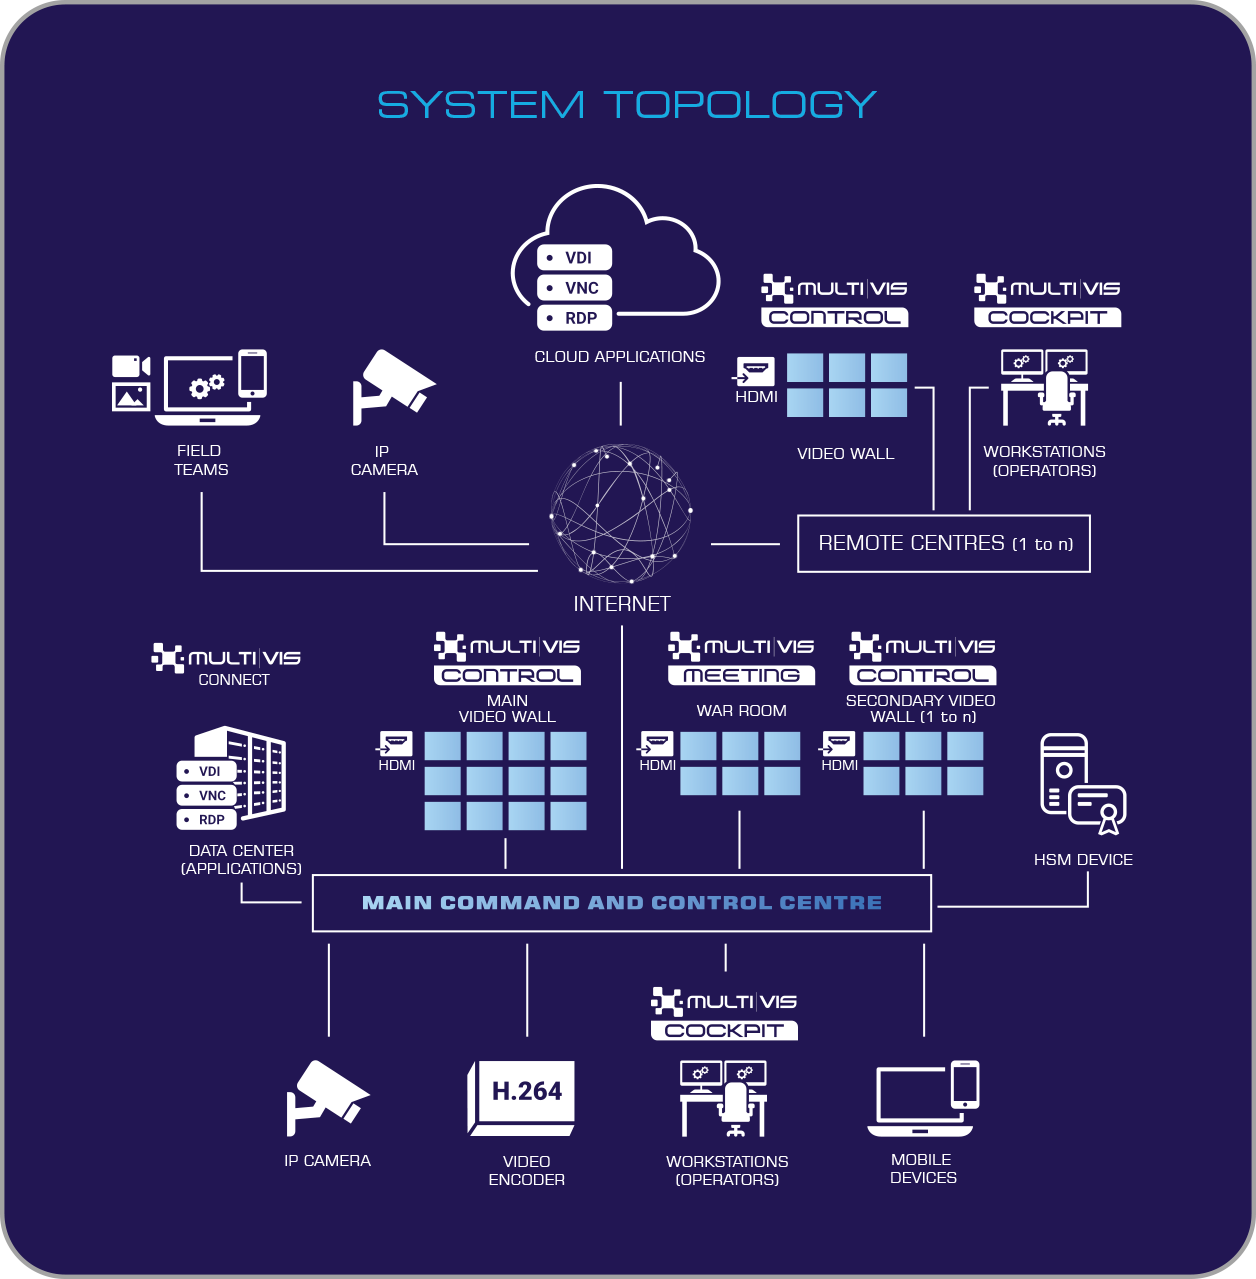 System Topology